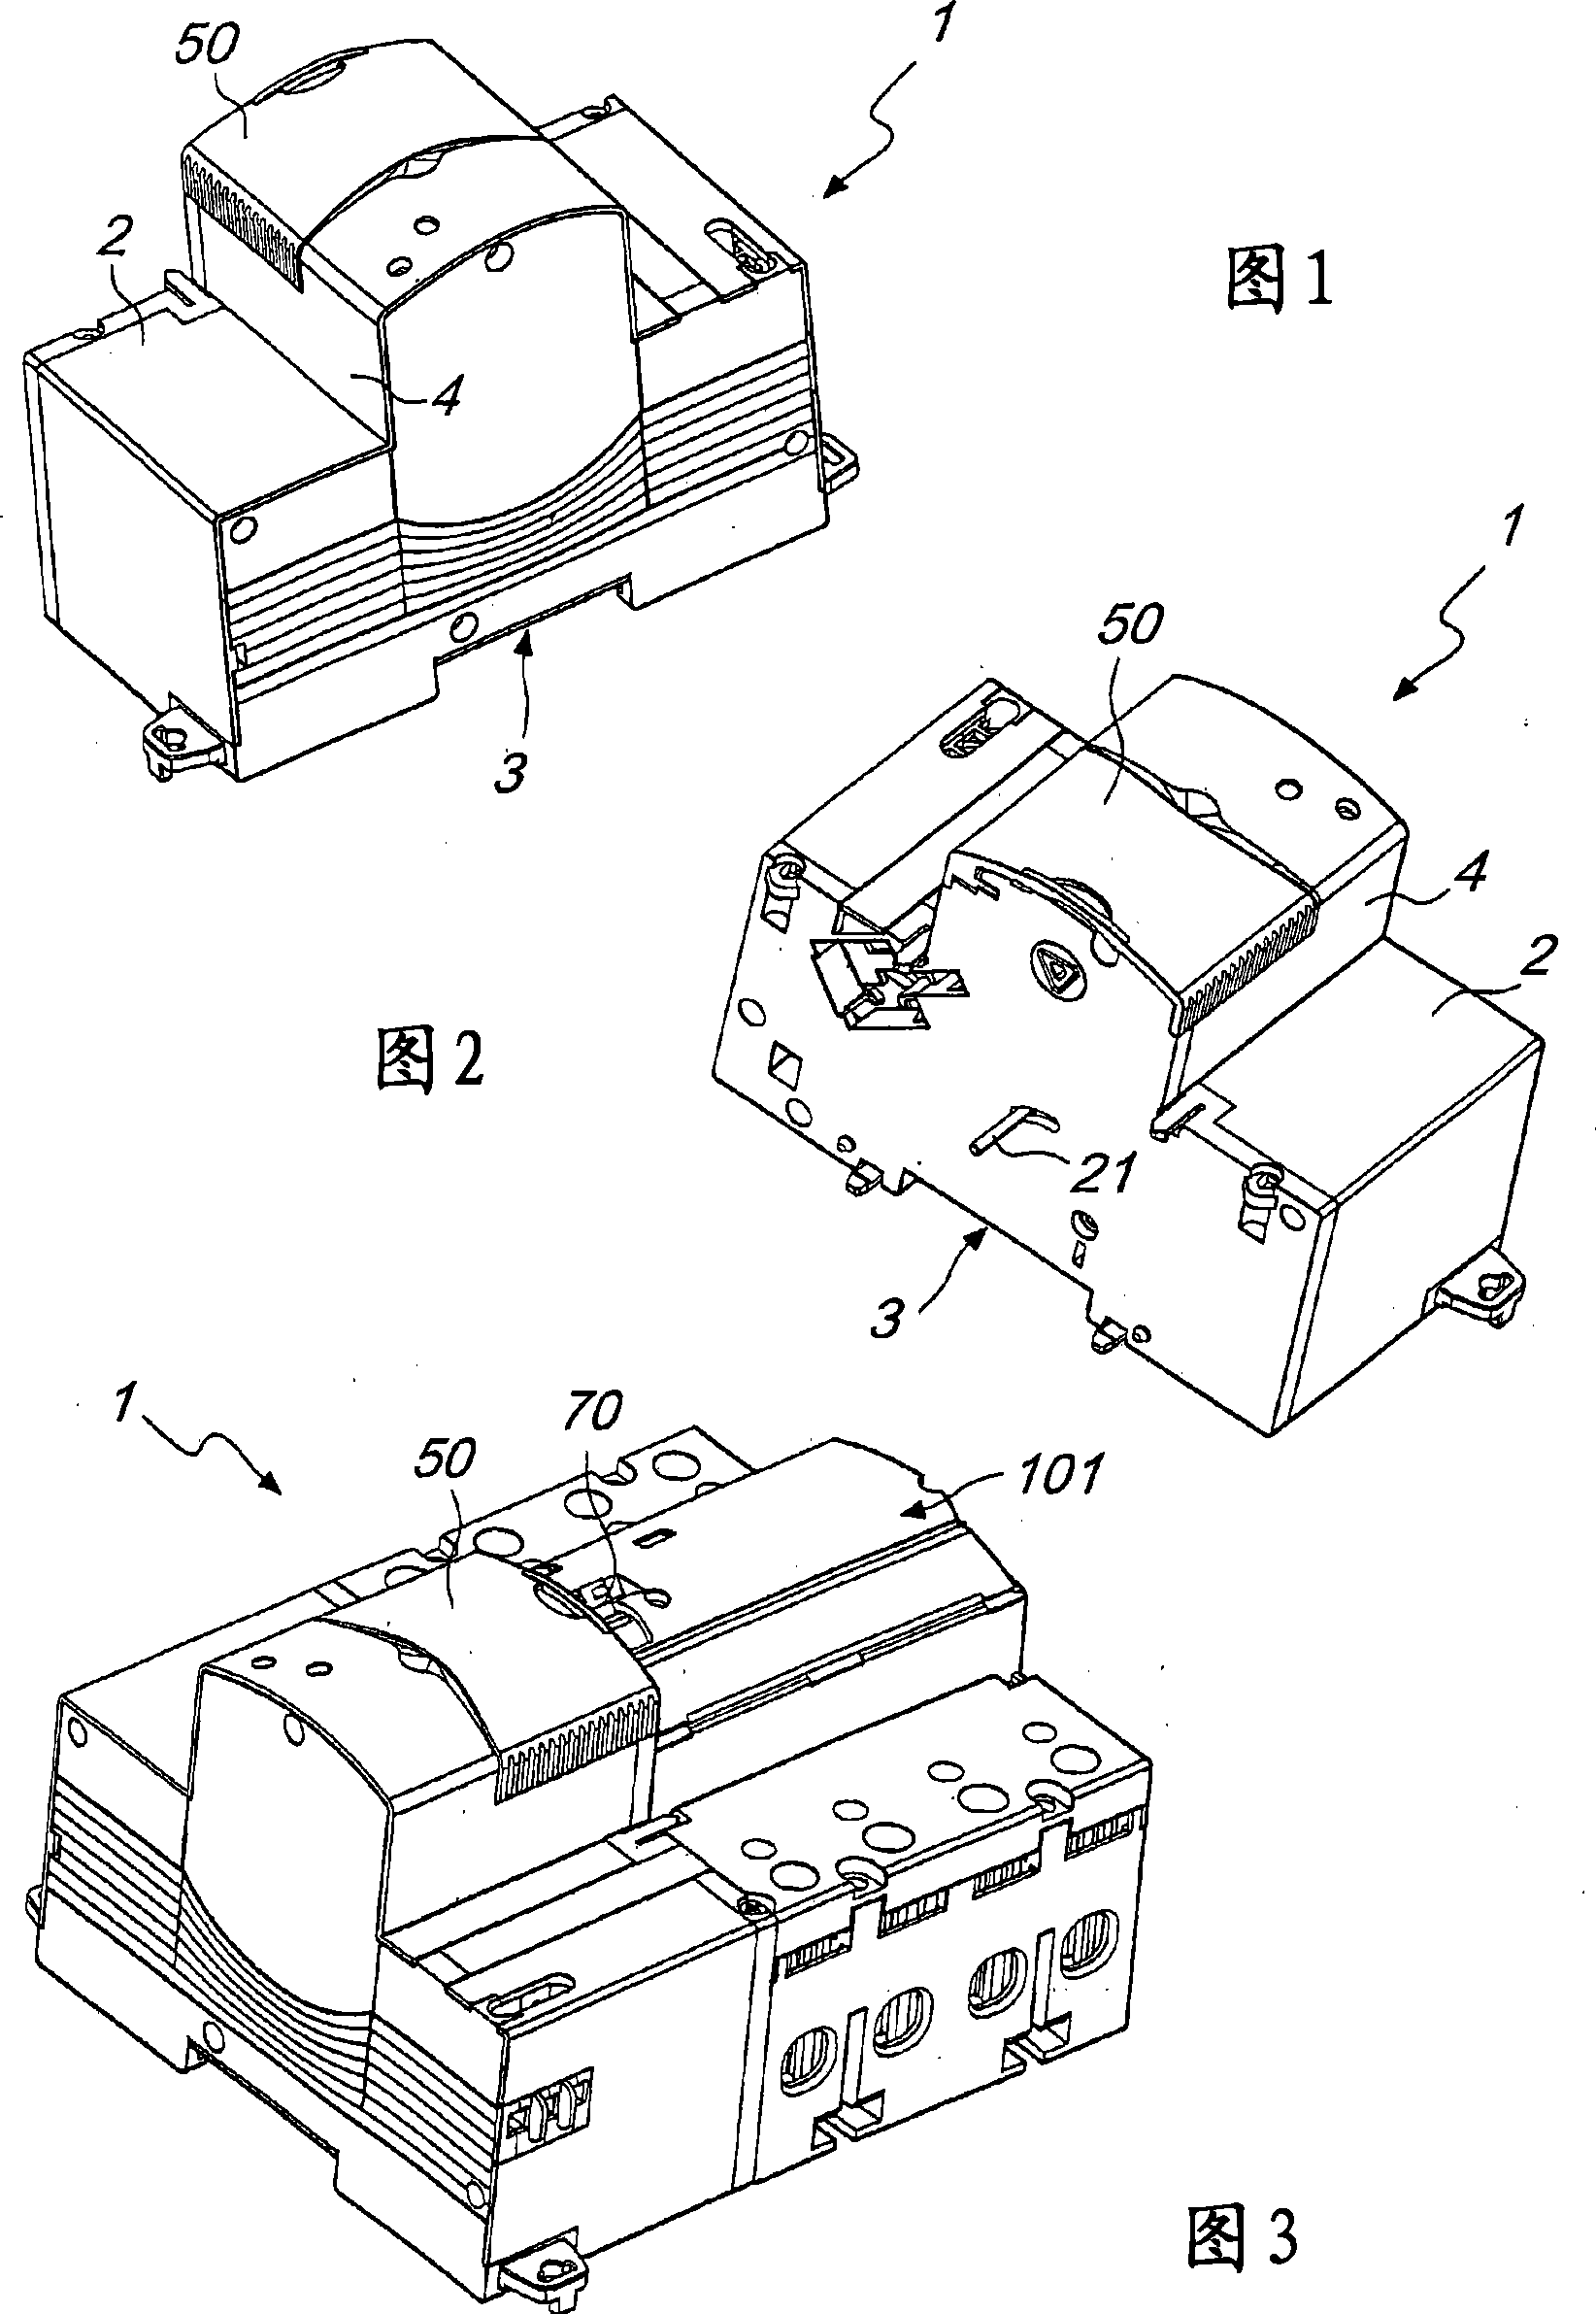 Automatic reset and self-test device particularly for residual current operated circuit breakers and the like